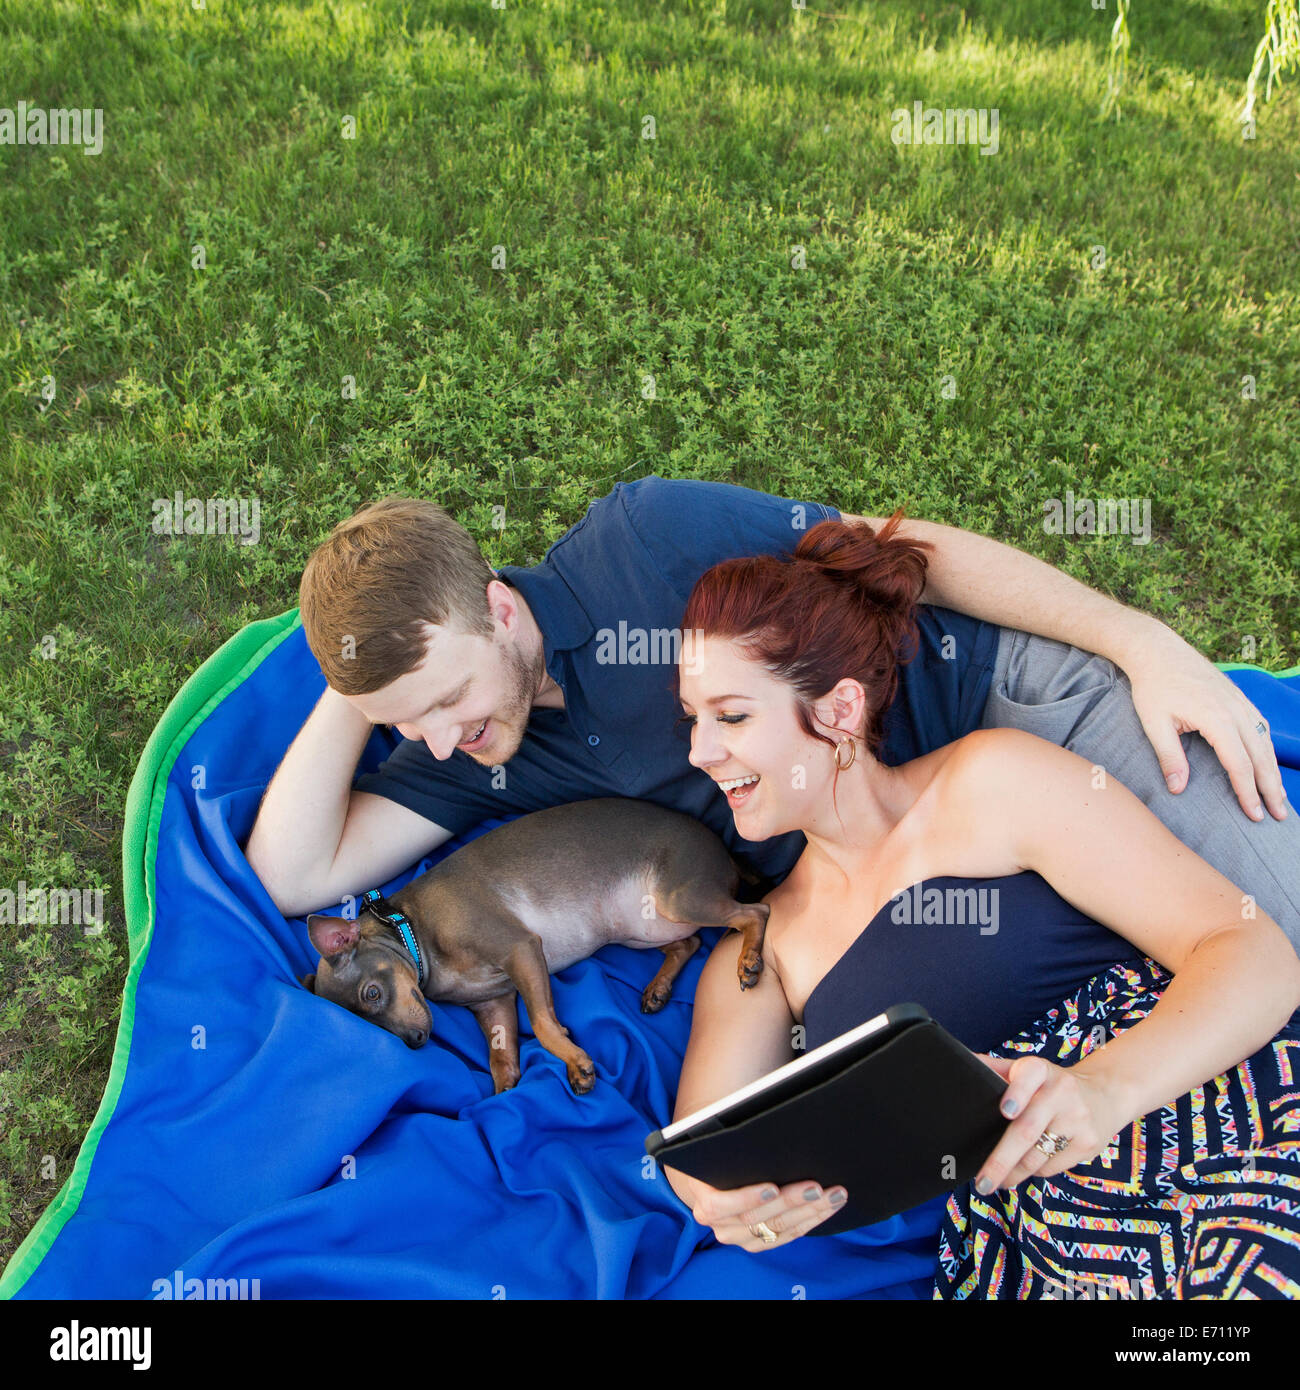 A couple on a blue rug with a small dog. A woman holding a digital tablet. Stock Photo